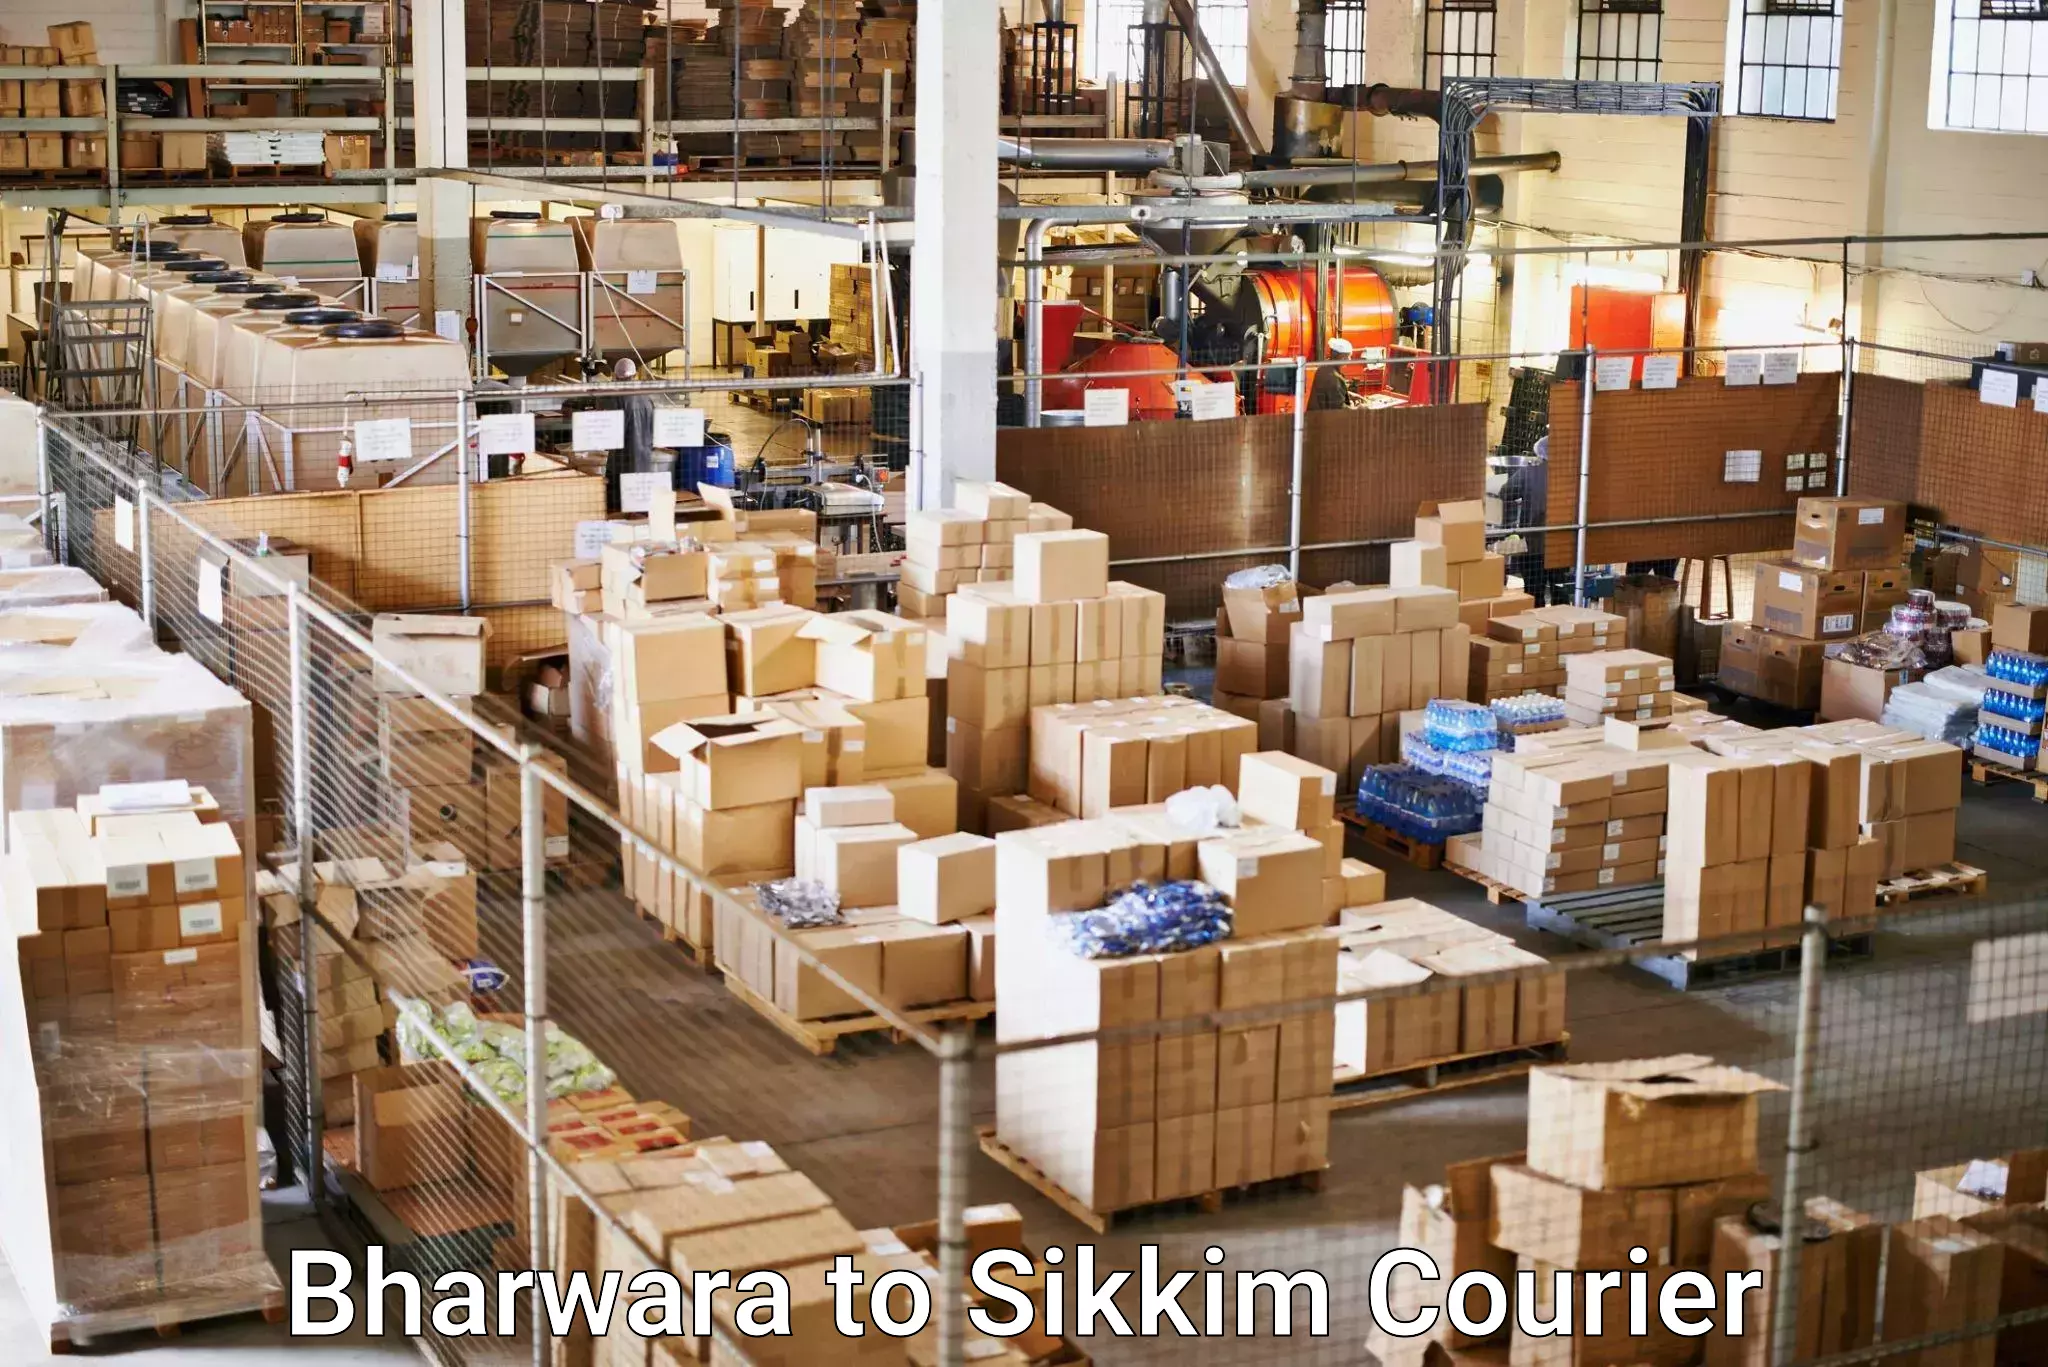 Fast-track shipping solutions Bharwara to Sikkim